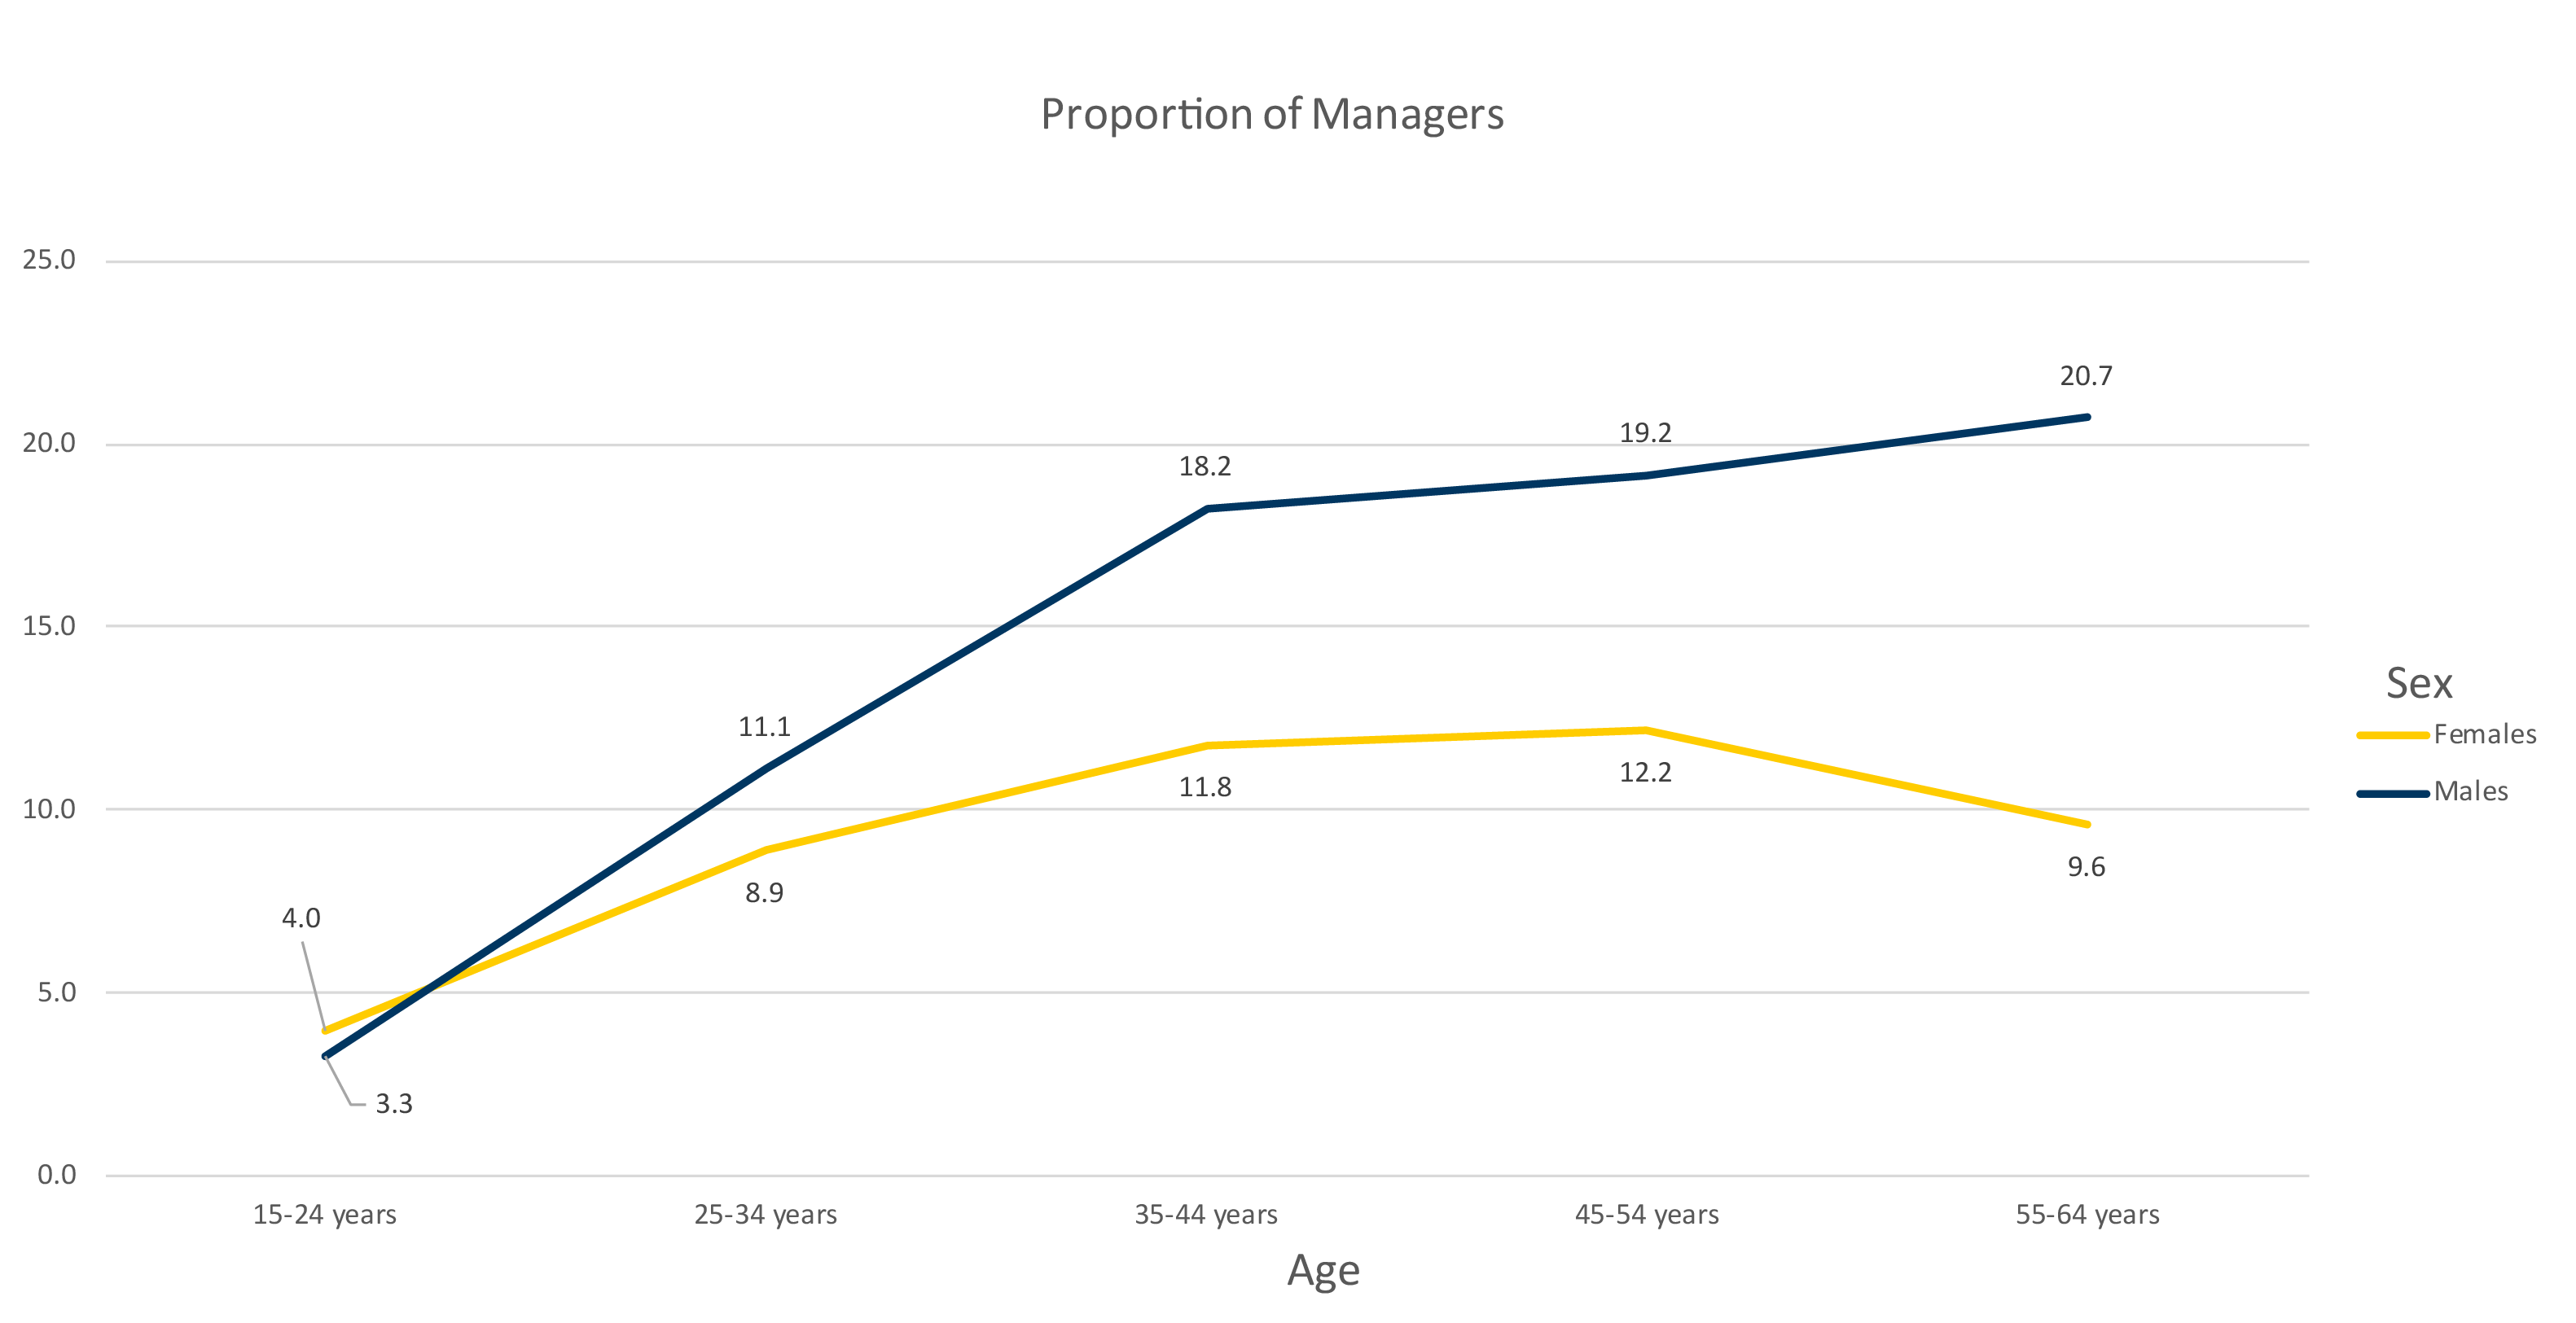 This graph depicts the proportion of managers by age and gender within the Australian workforce